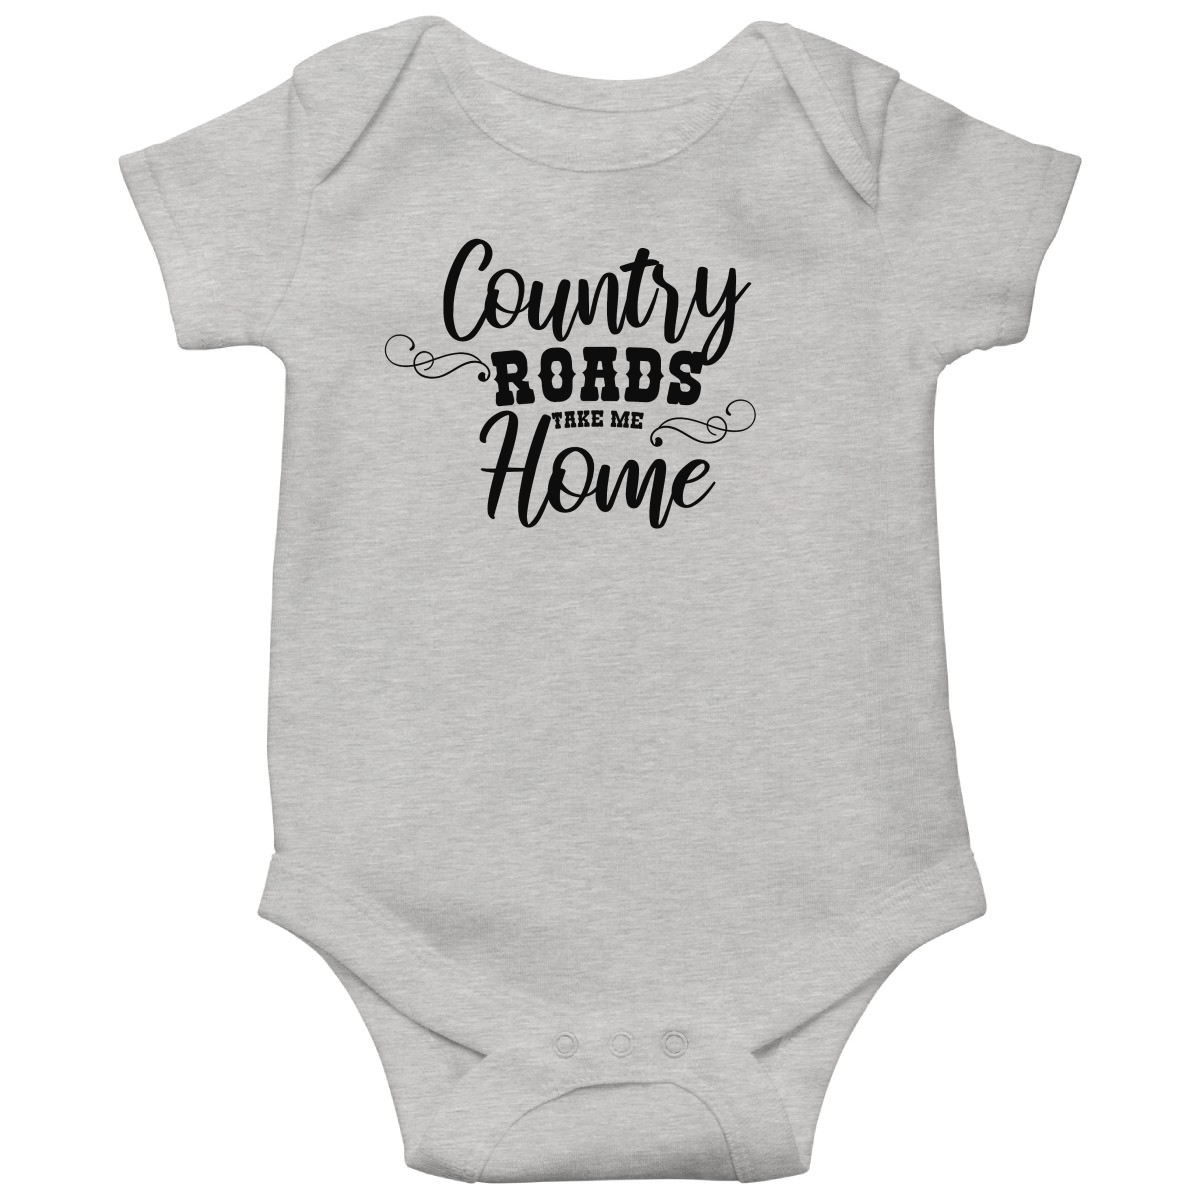 Country Roads Take Me Home Baby Bodysuits | Gray